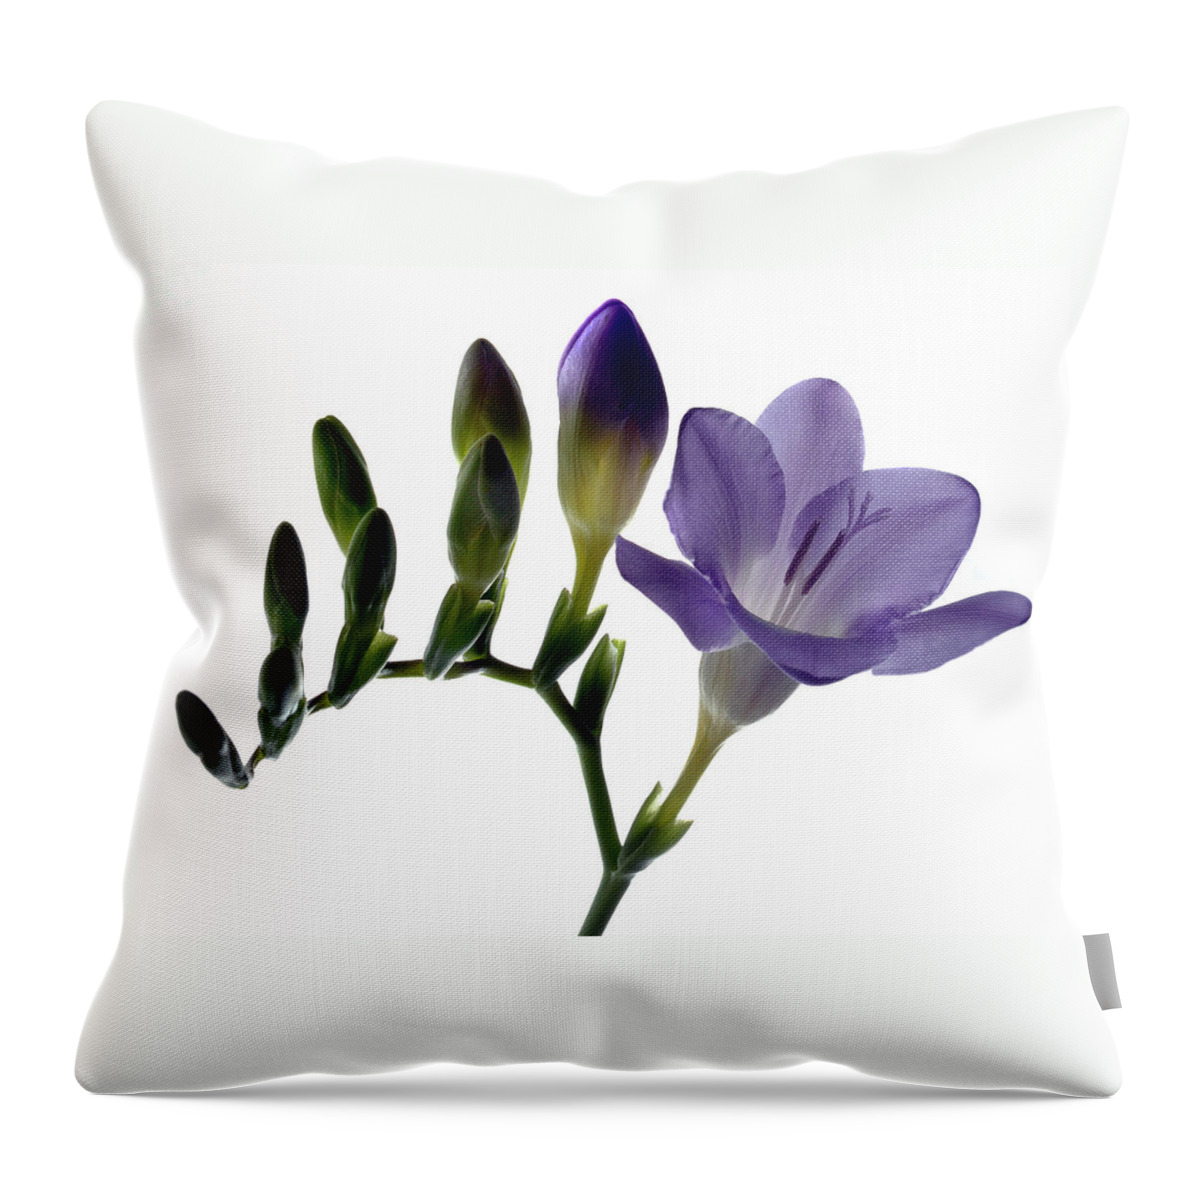 Freesia Throw Pillow featuring the photograph Fresh Freesia by Terence Davis